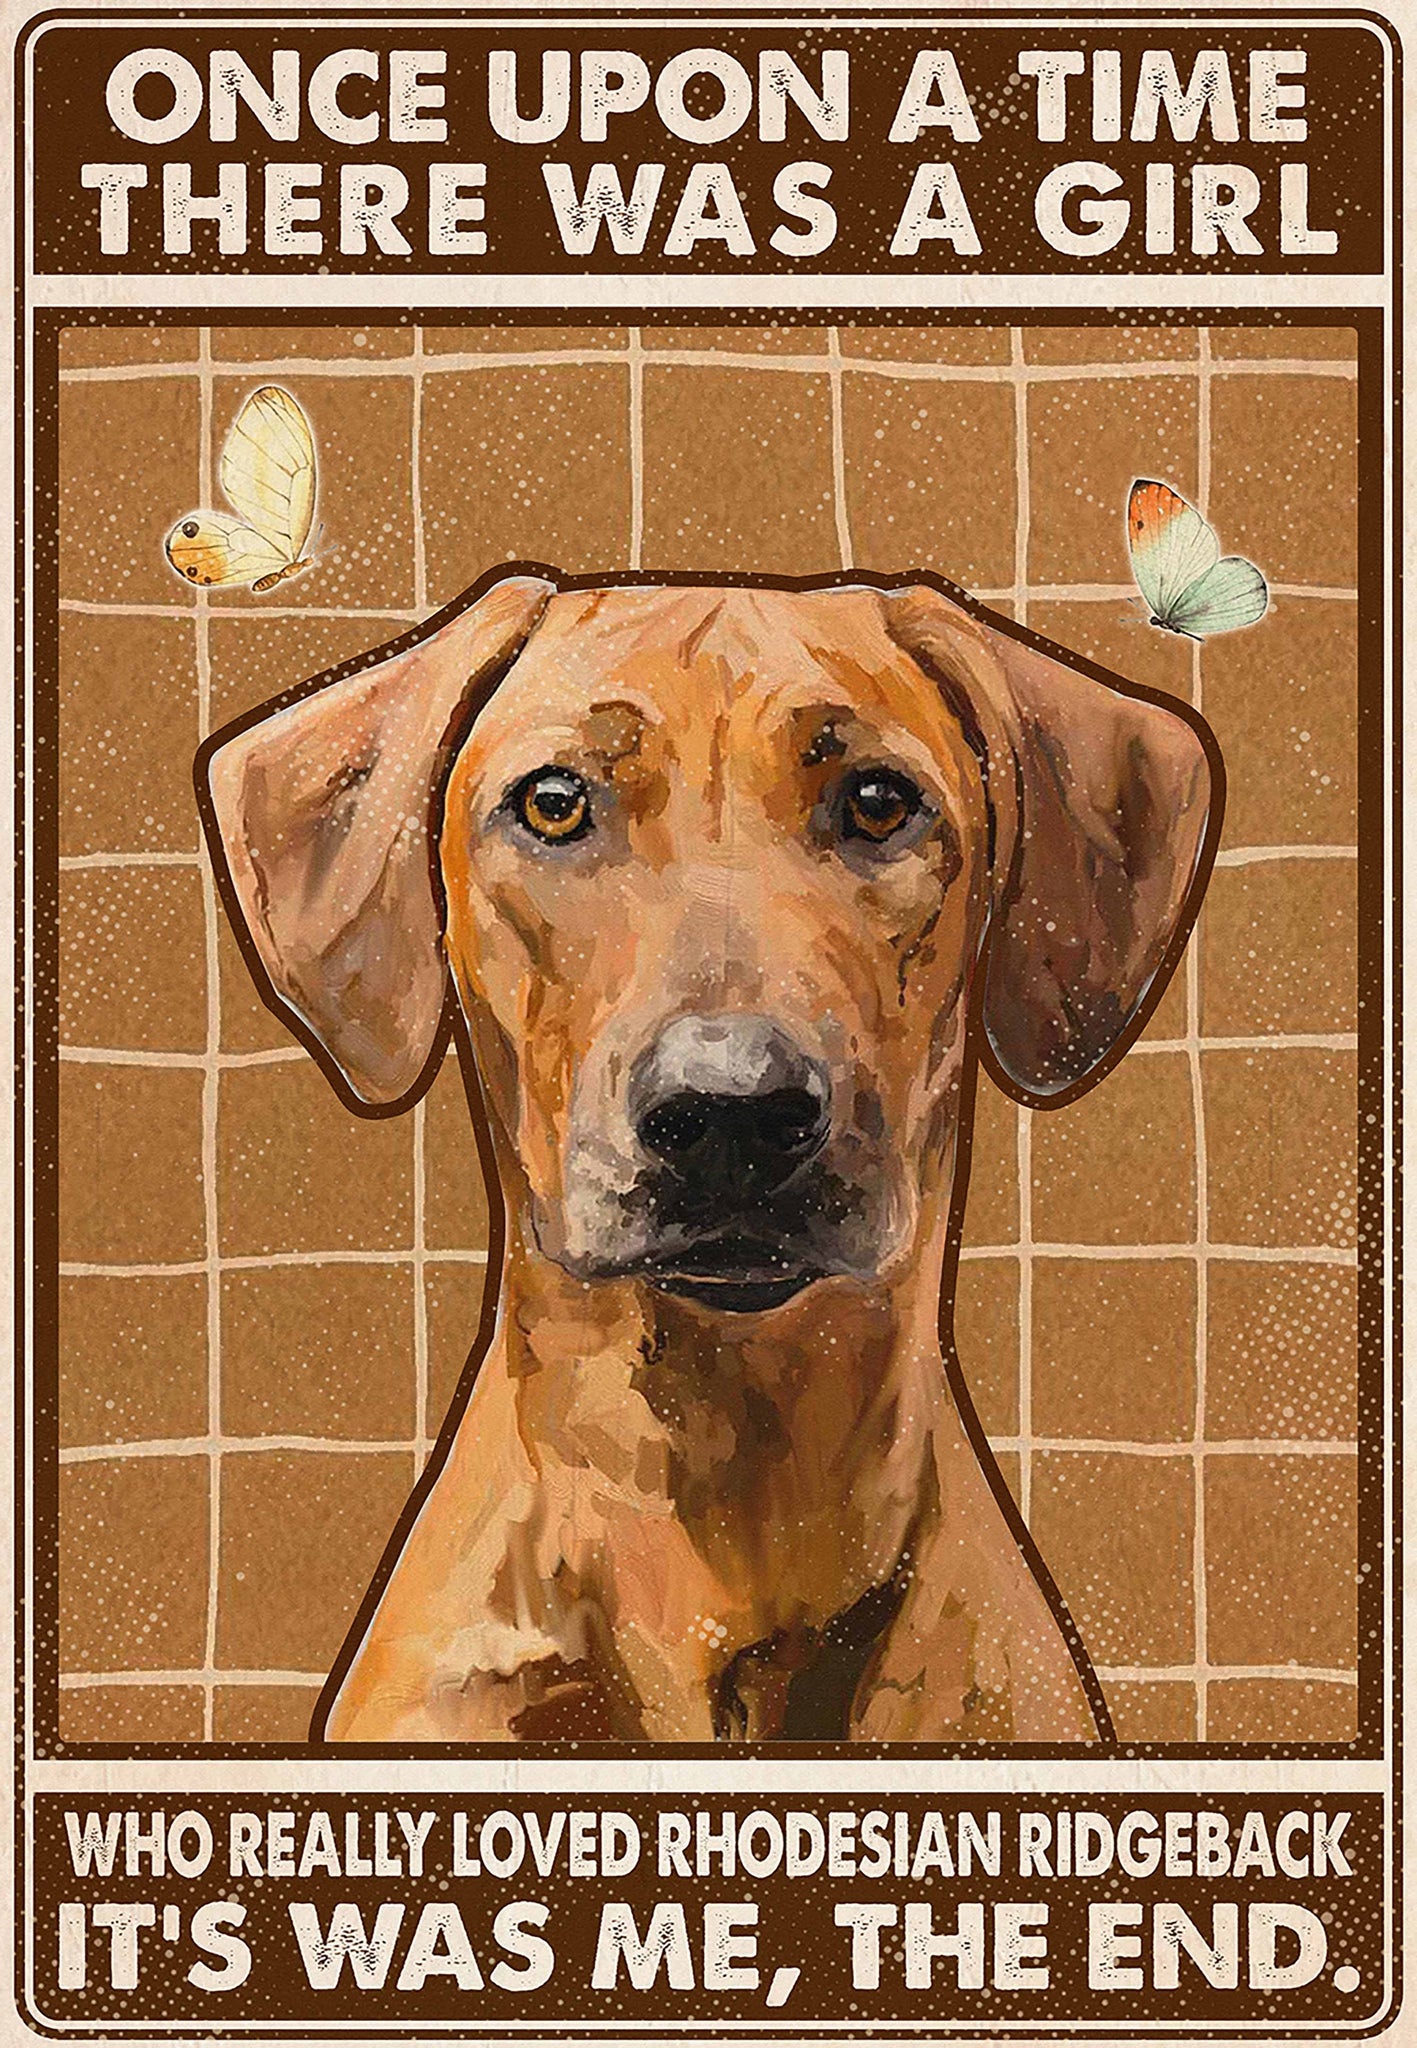 Rhodesian Ridgeback - Really Loved Beagle It Was Me The End-MH1008